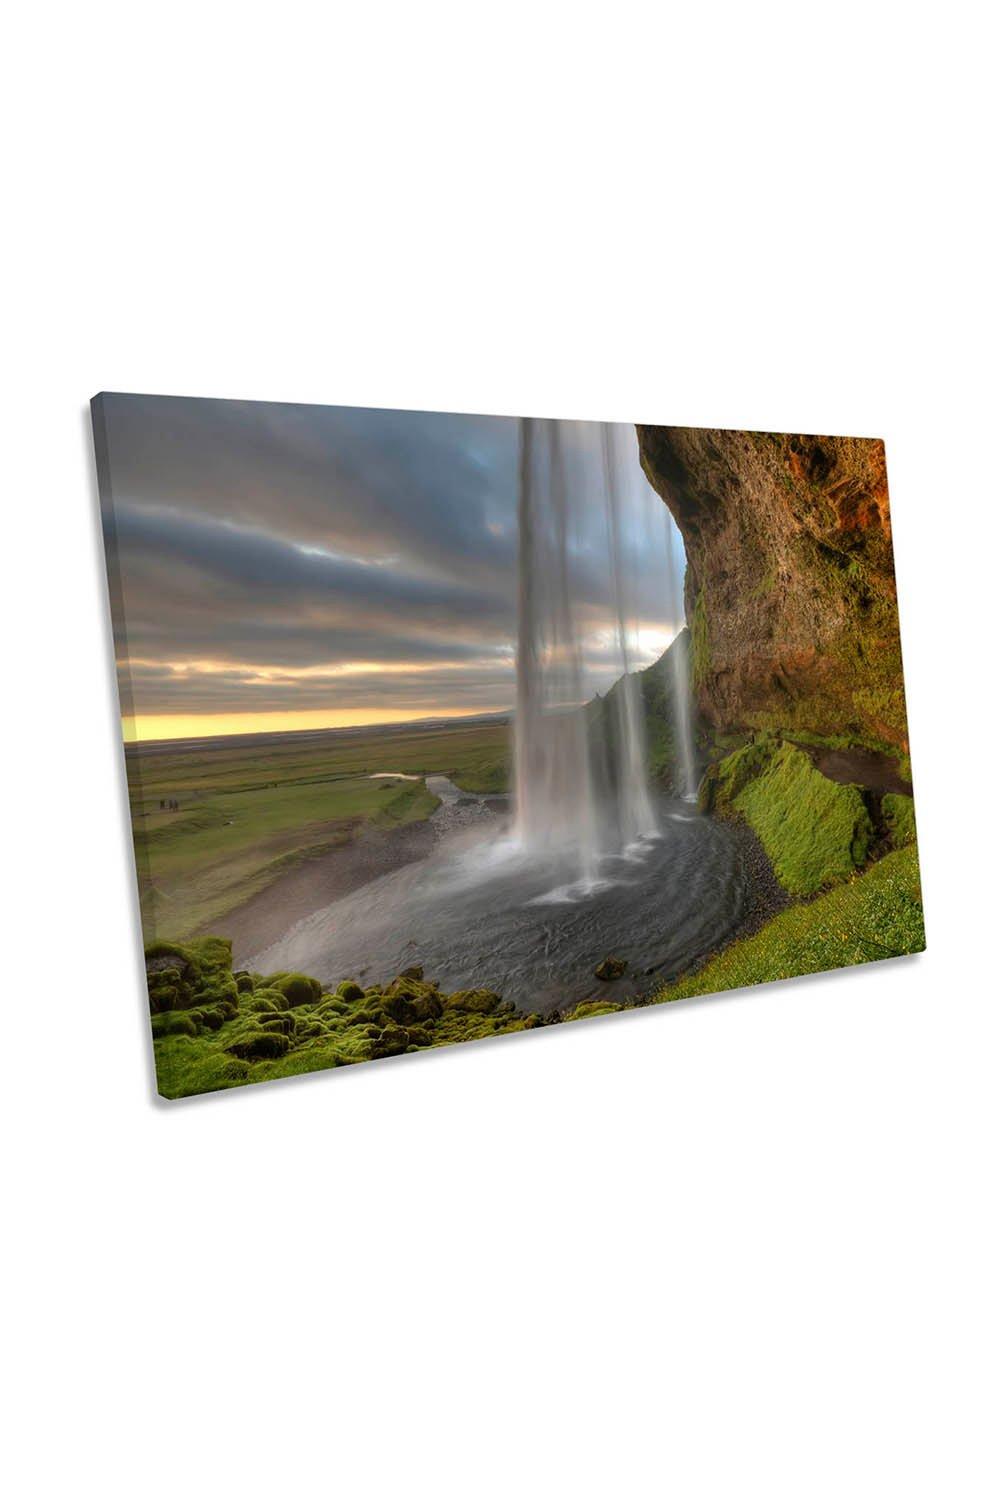 The Waterfall Curtain Iceland Canvas Wall Art Picture Print